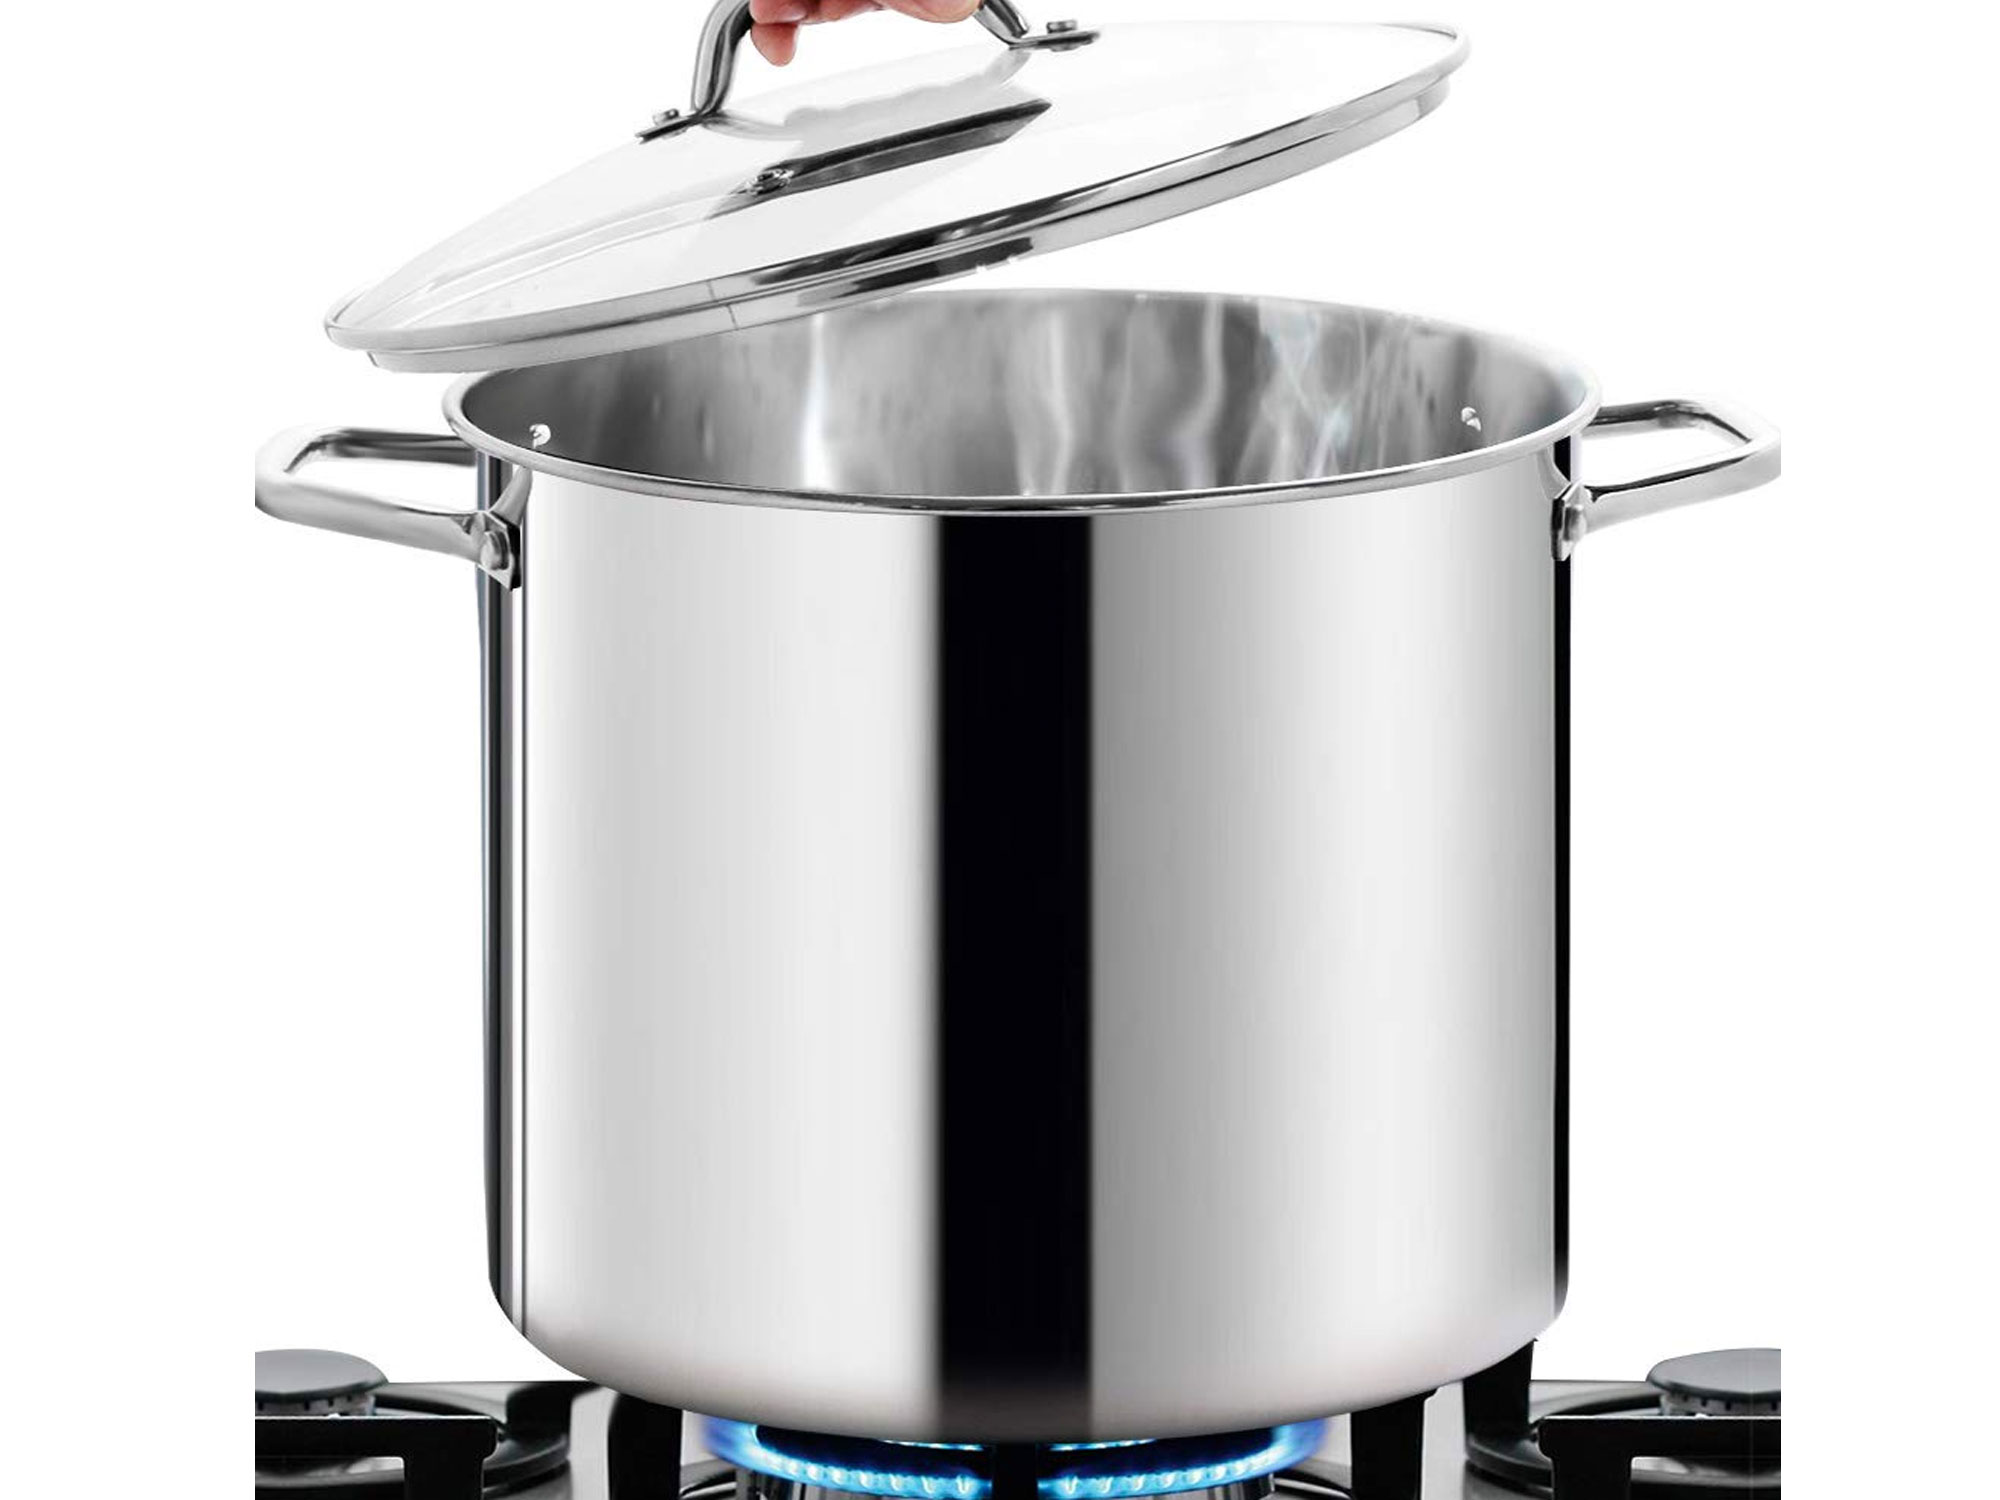 Homichef stainless steel stock pot with lid